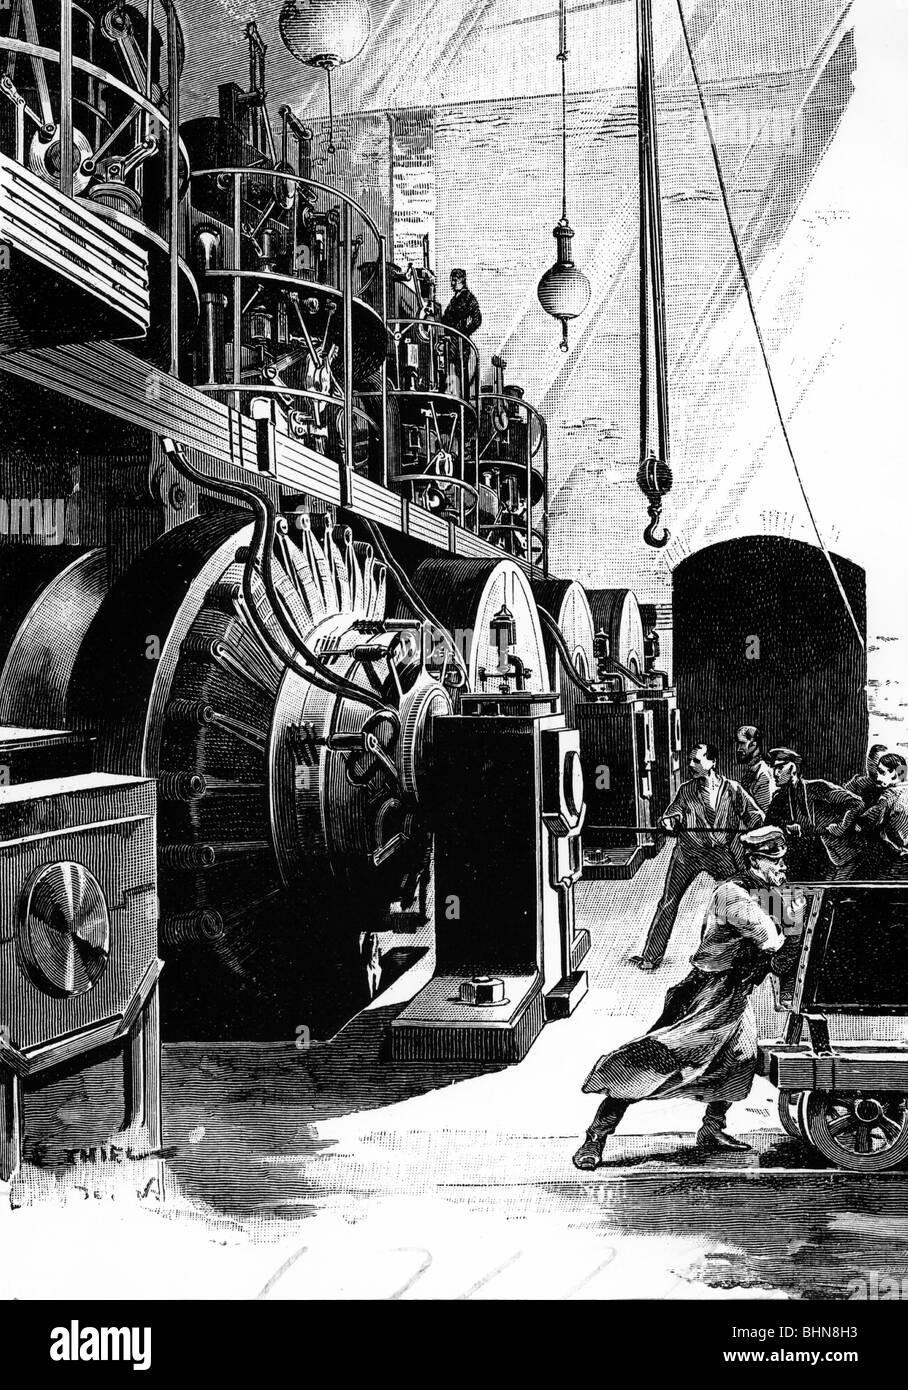 energy, electricity, generation of current, dynamos of Siemens company, 2nd half of 19th century, historic, historical, dynamos, power generation, electricity generation, machine, machines, electric power, electrification, industry, industrial, factory, production, industrialization, industrialisation, people, Stock Photo